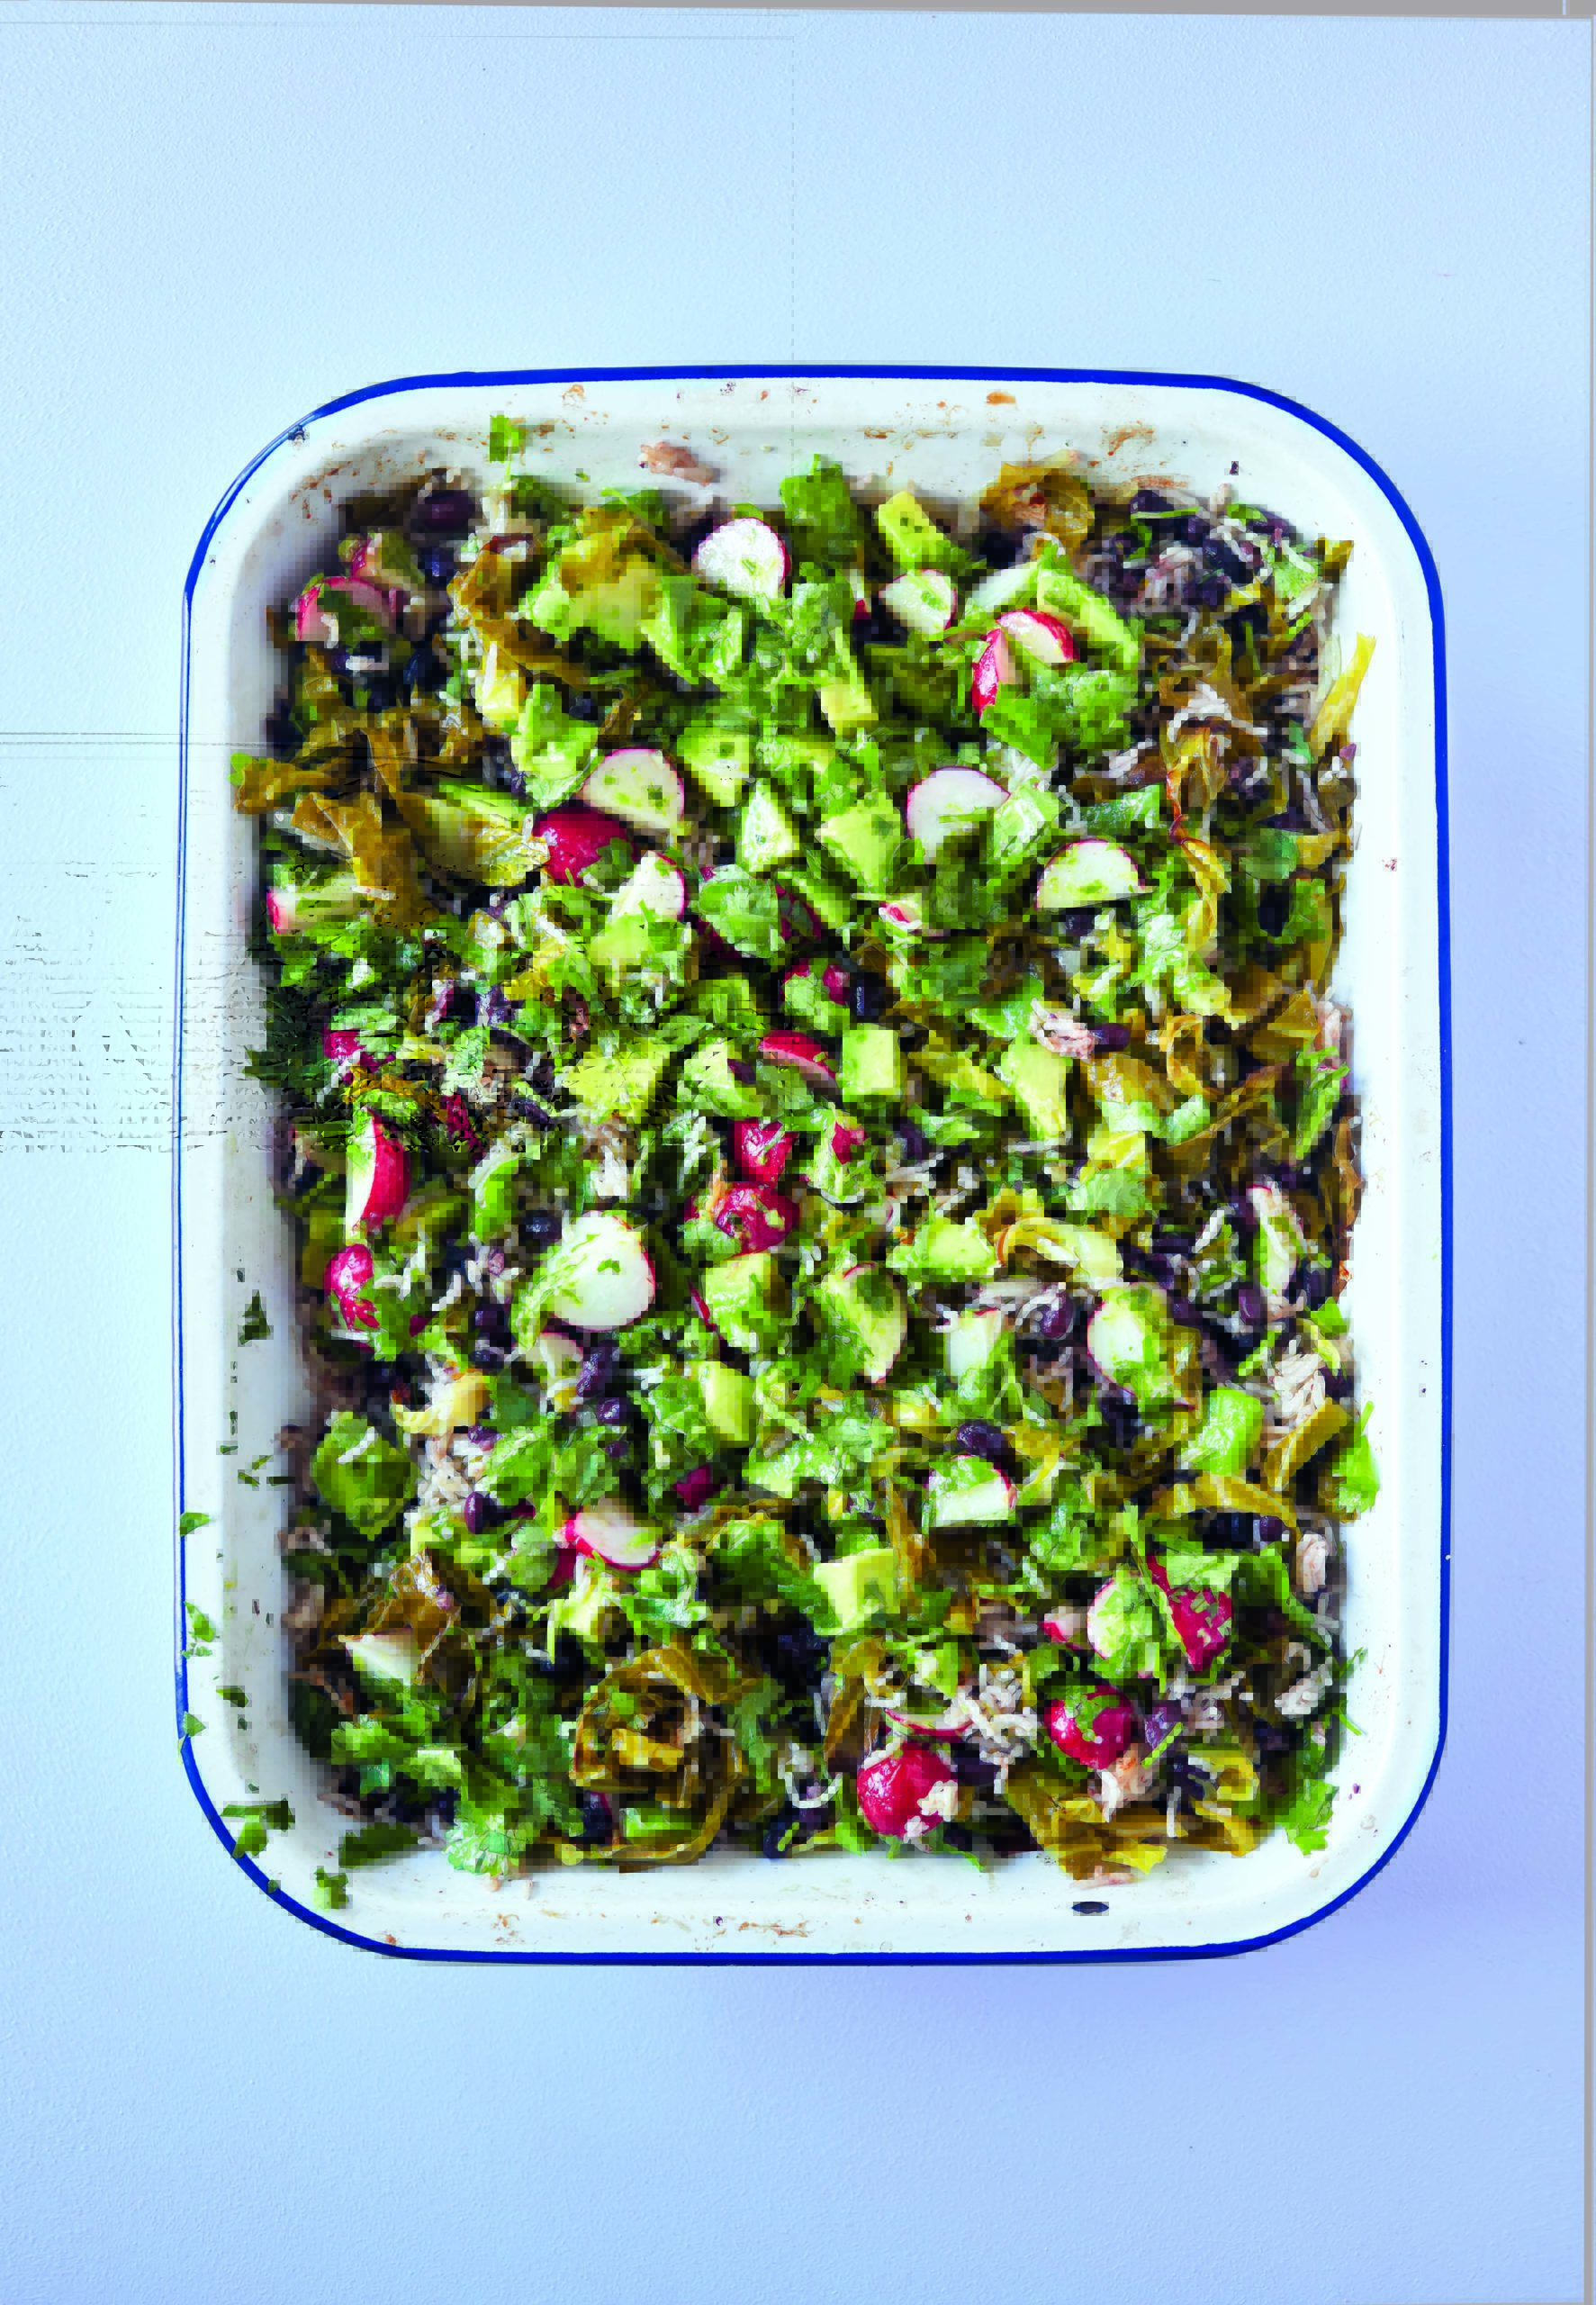 Rukmini Iyer’s All-In-One Brazilian Black Beans and Rice with Avocado and Radish Salad